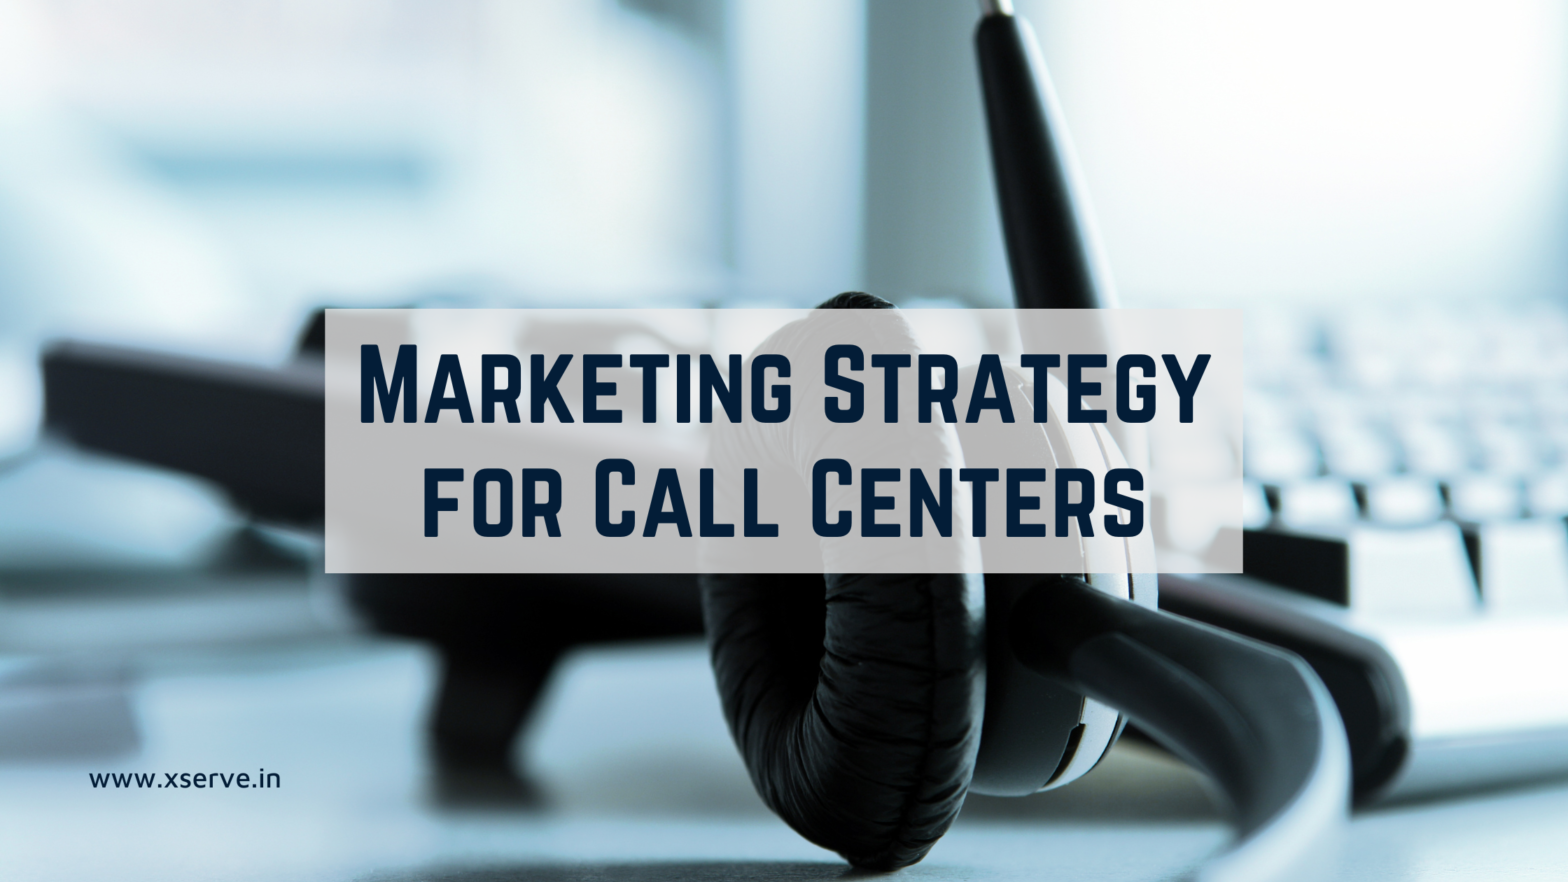 Call center marketing strategy for new call center startups.